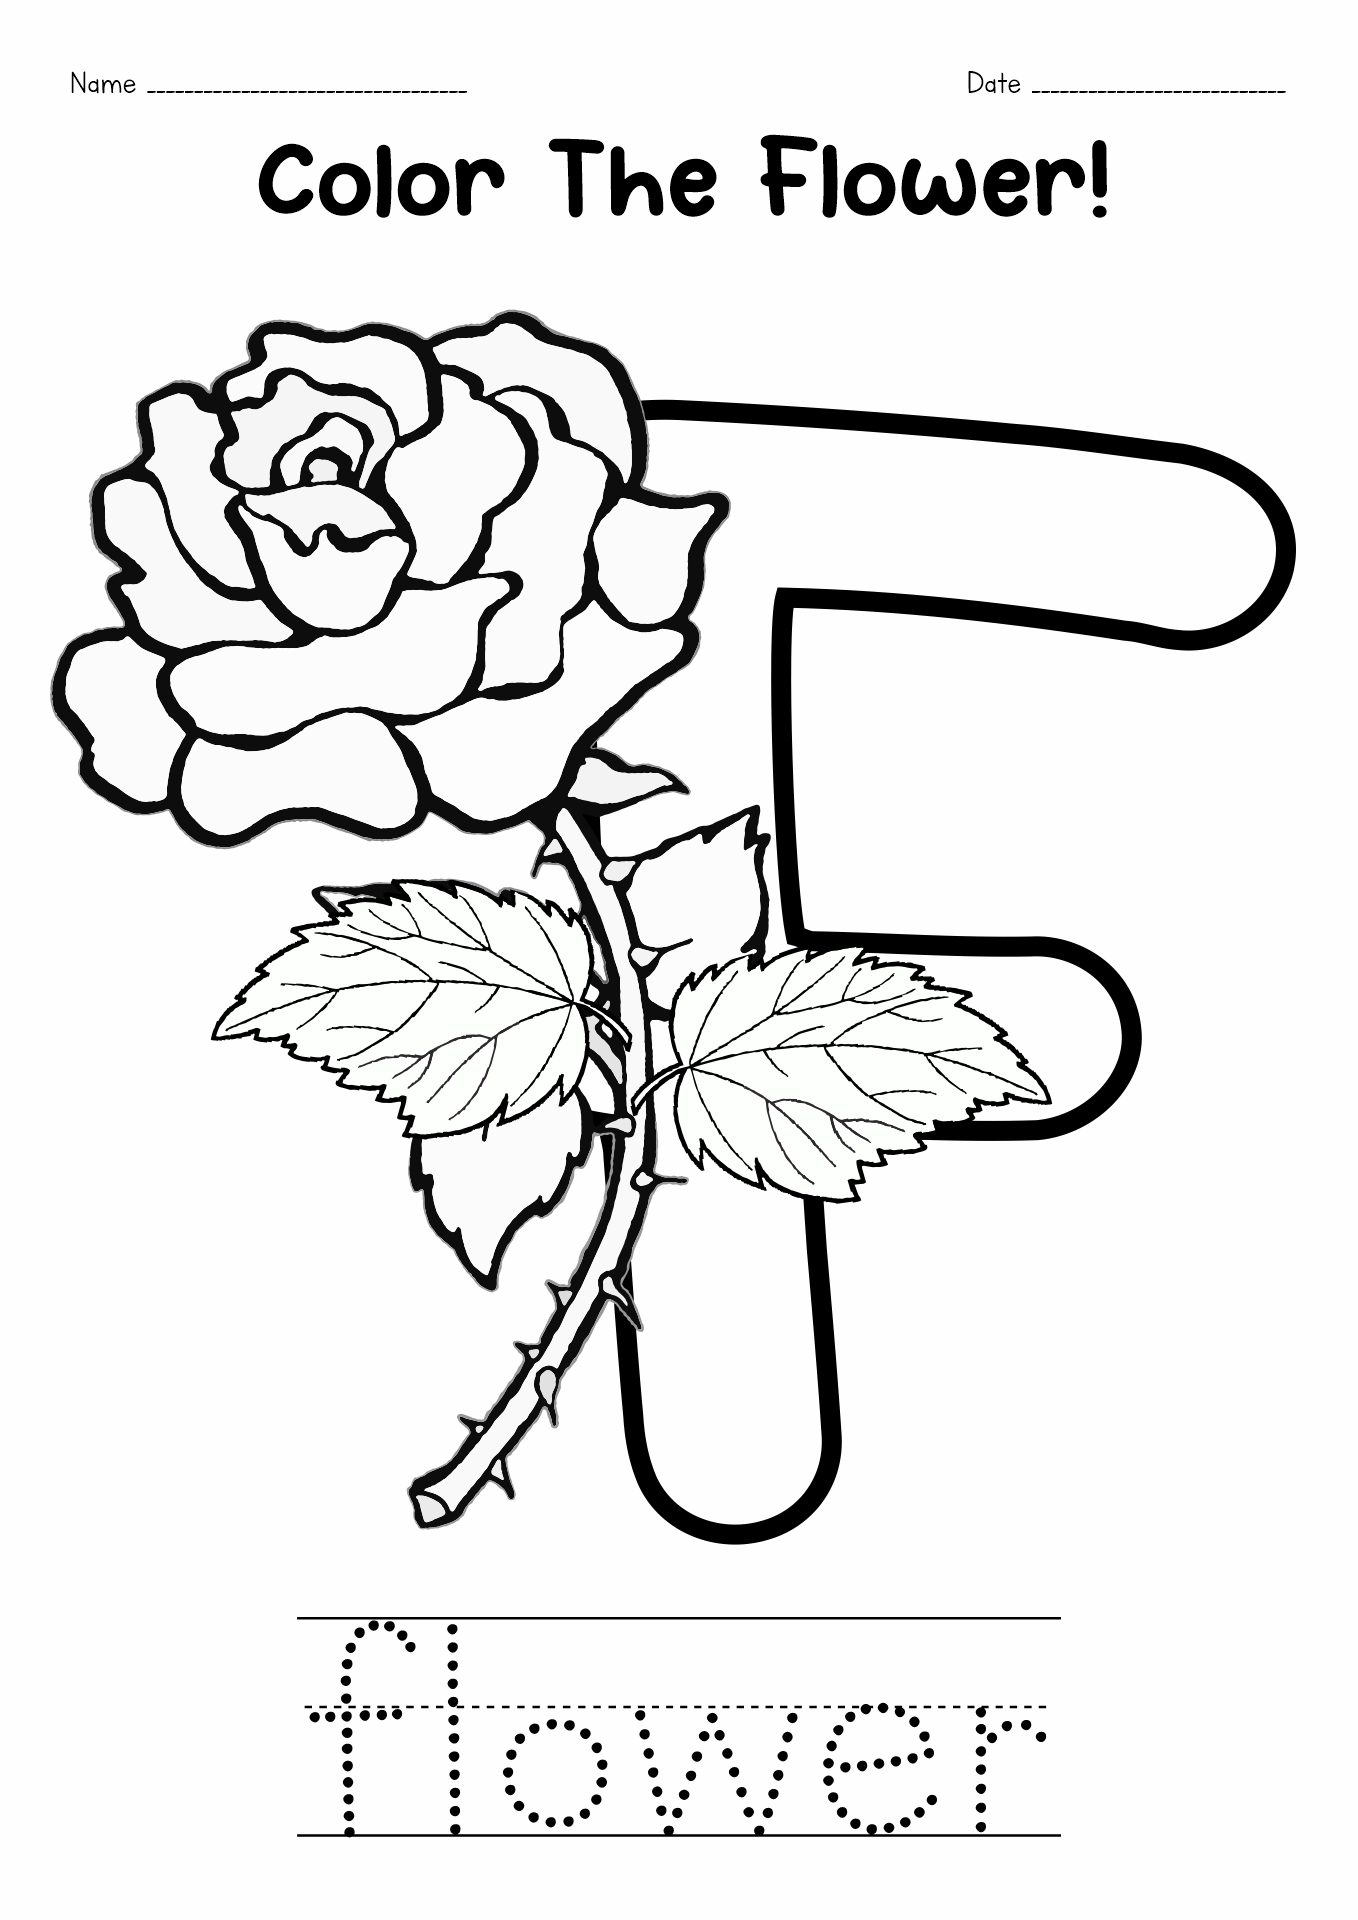 Letter F Coloring Pages Image